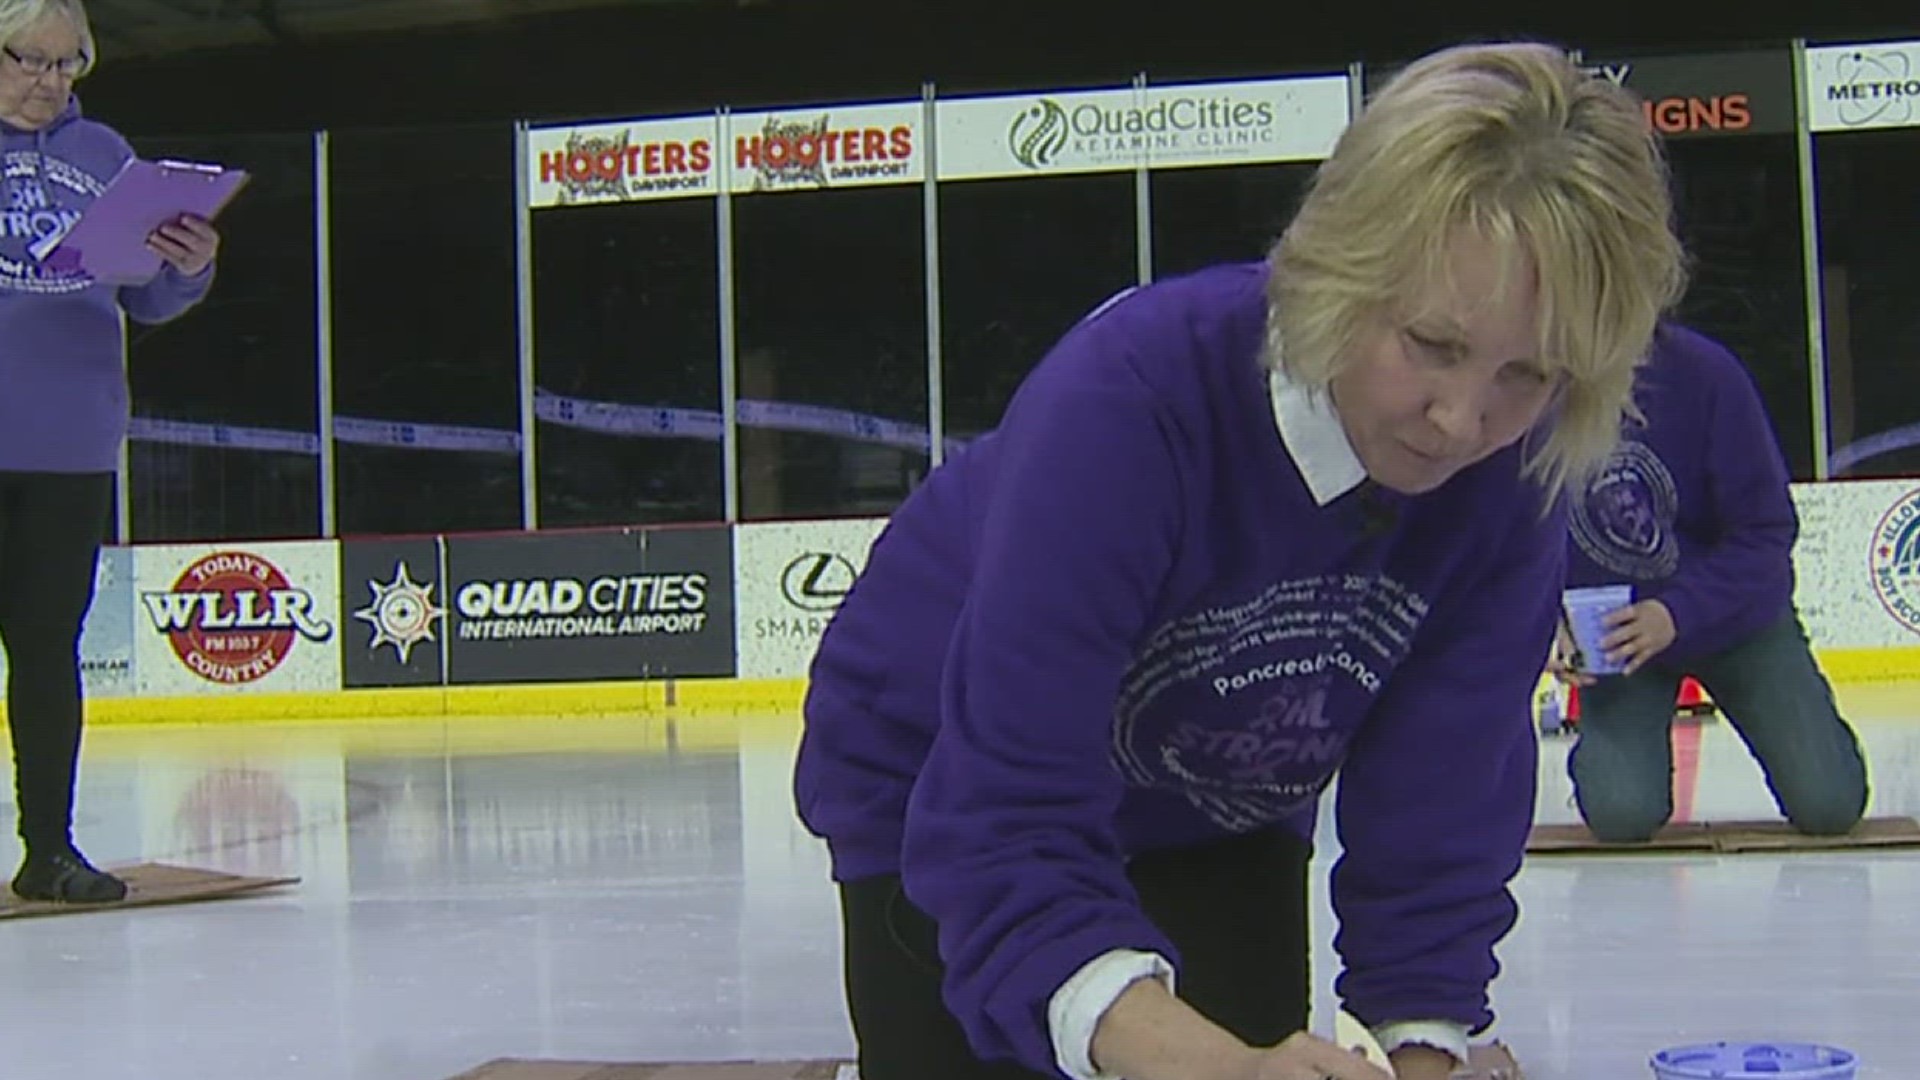 Peggy Ohl began the Ohl Strong Fund following her husband Brent's passing in 2016 from pancreatic cancer.